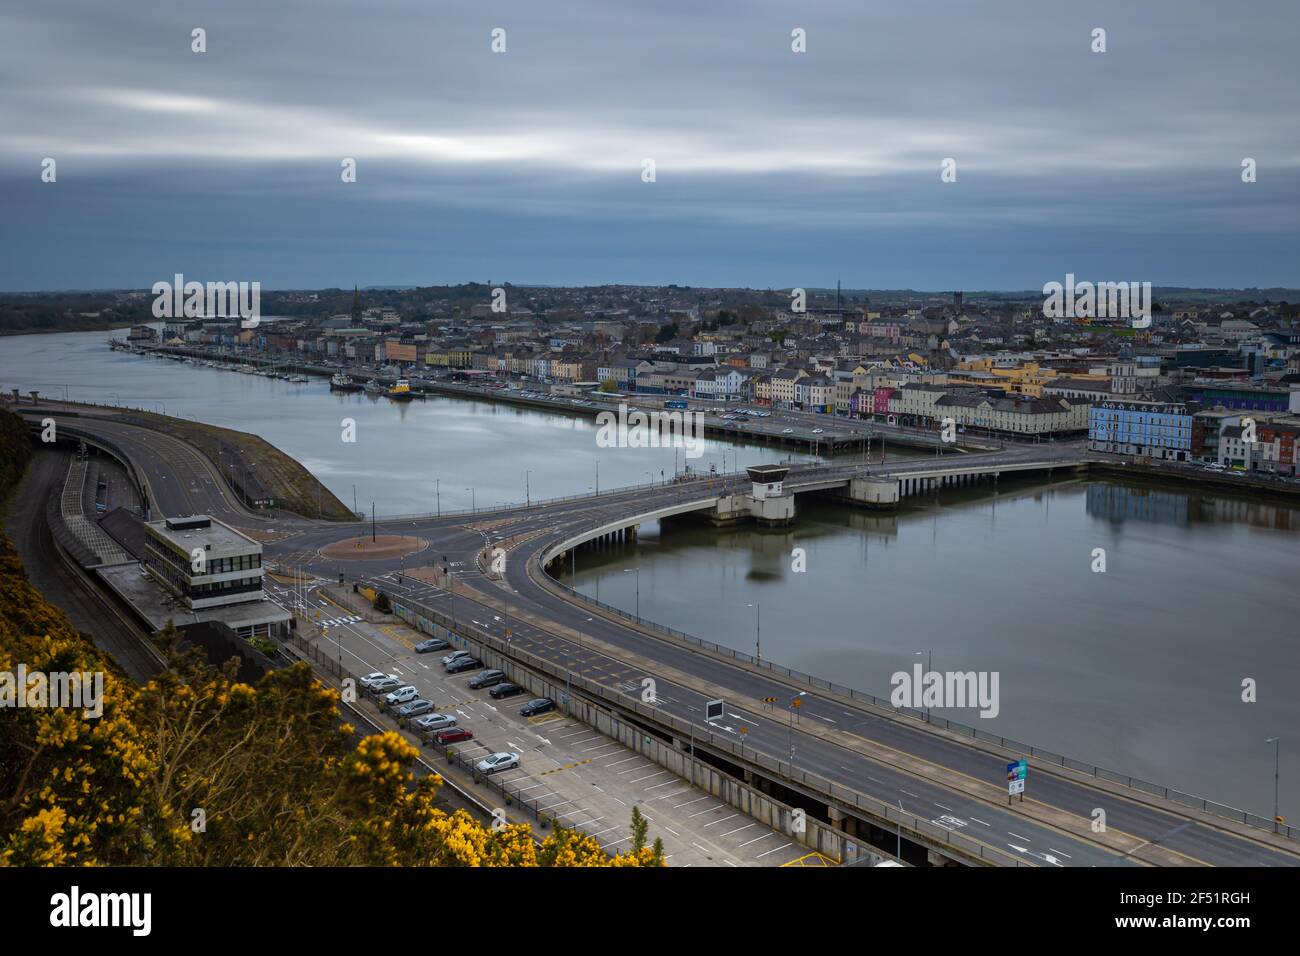 Aerial view of the city of Waterford. Ireland. Bridge over the river Suir and entrance bridge to the city Stock Photo